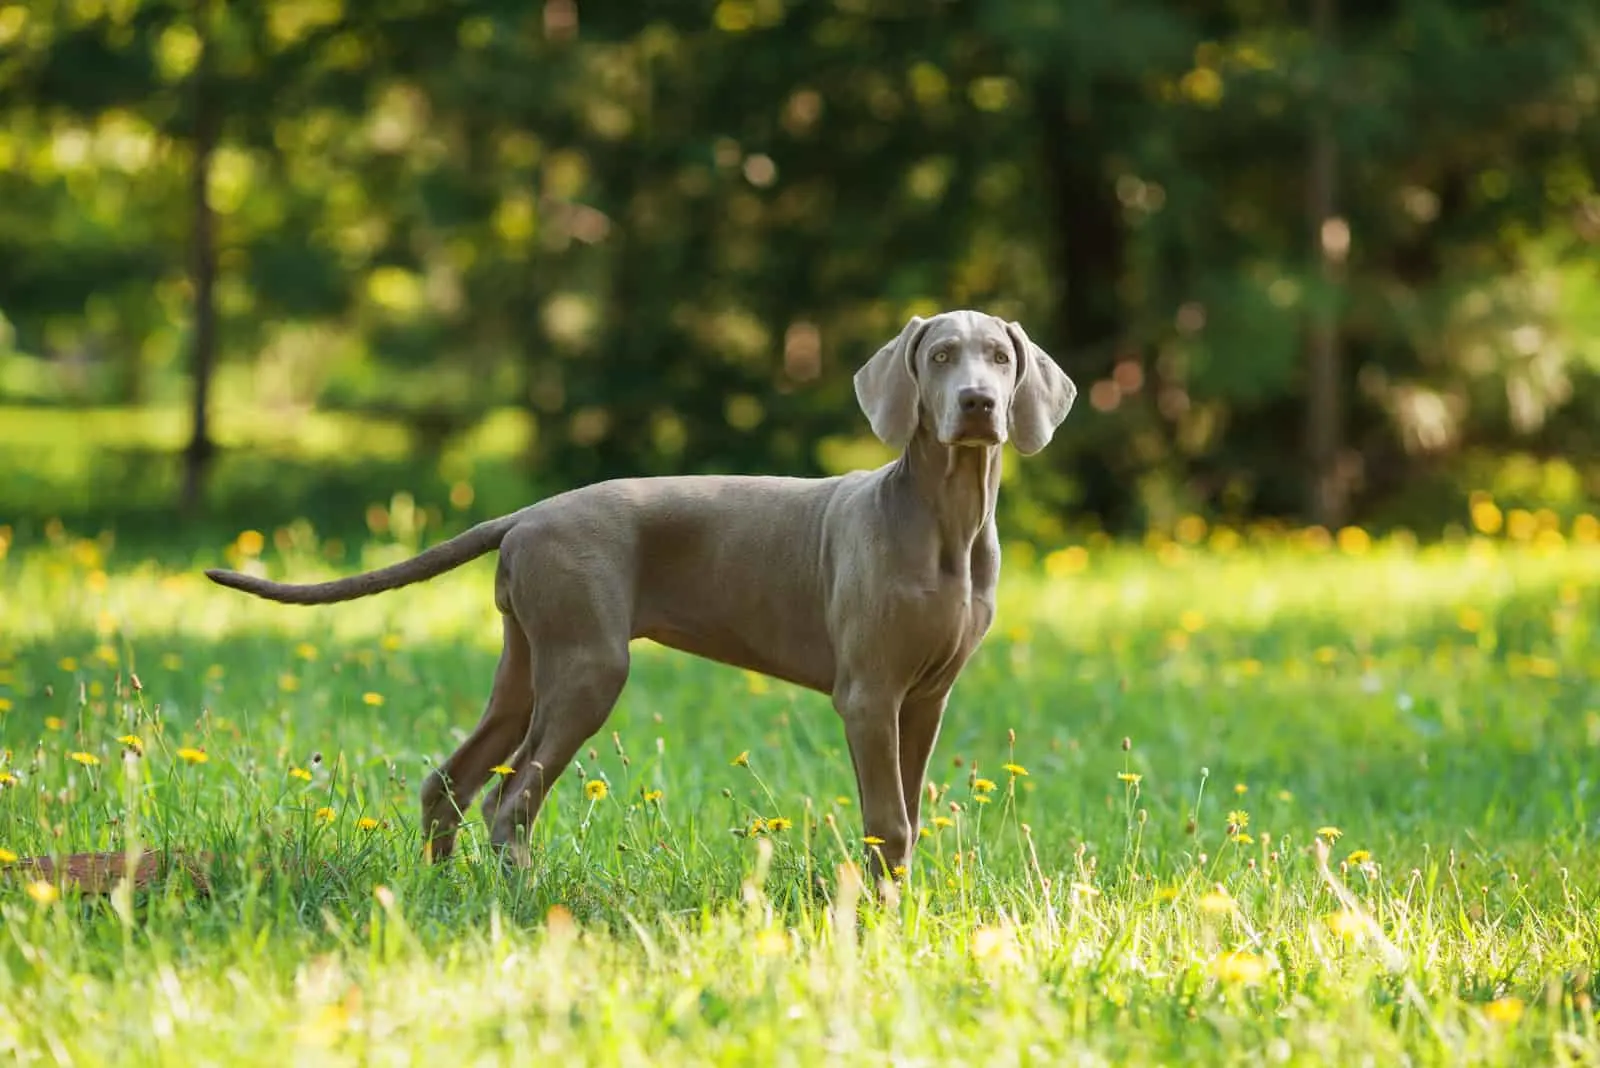 dog with gray coat standing outdoors on green grass